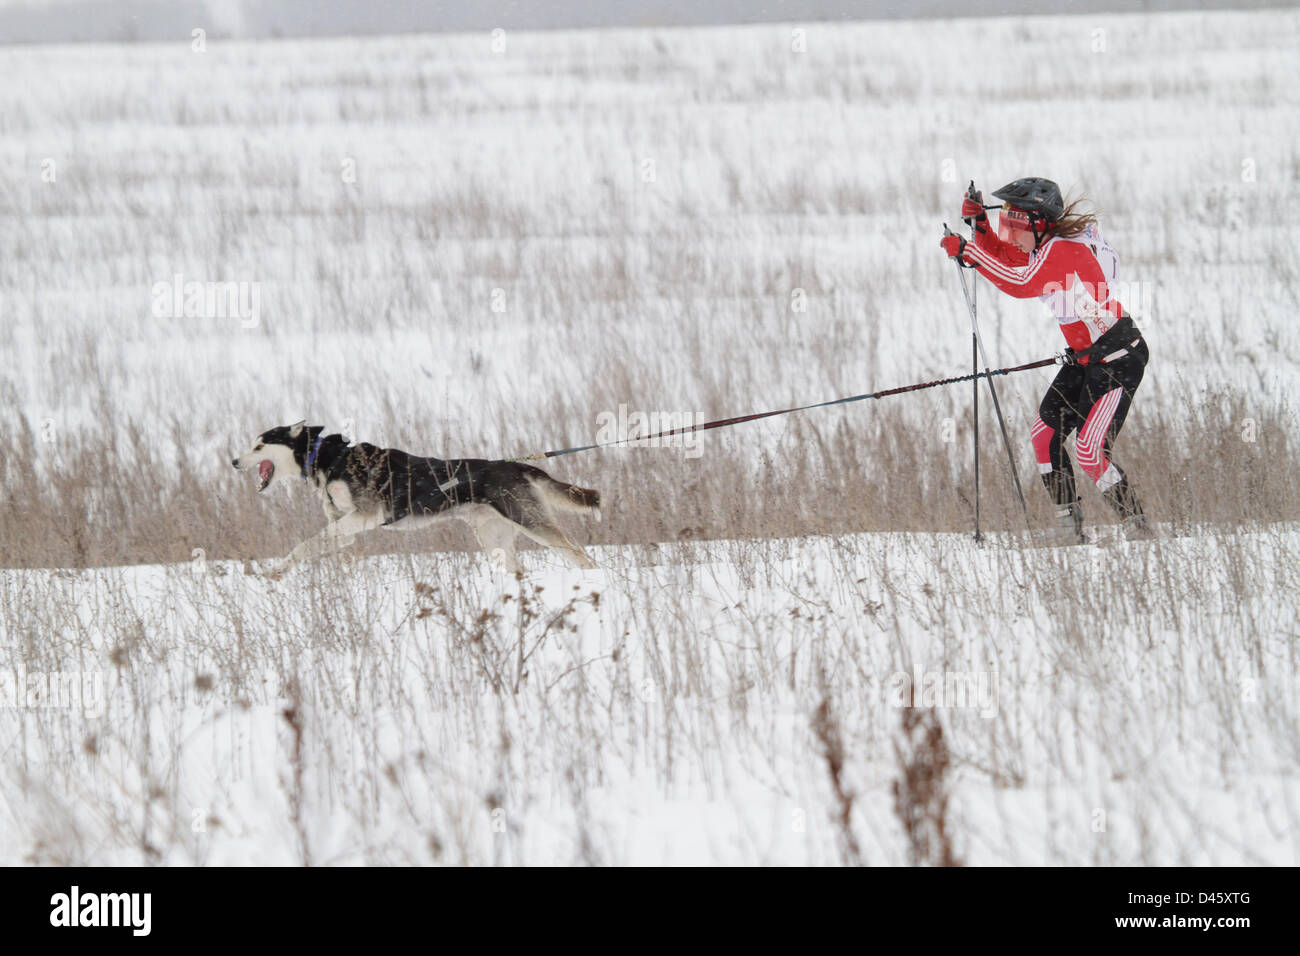 March 2, 2013 - Russia - March 02,2013. Pictured: Skijoring in Tula region of Russia. Skijoring is a winter sport where a person on skis is pulled by a horse, a dog or a motor vehicle. (Credit Image: © PhotoXpress/ZUMAPRESS.com) Stock Photo